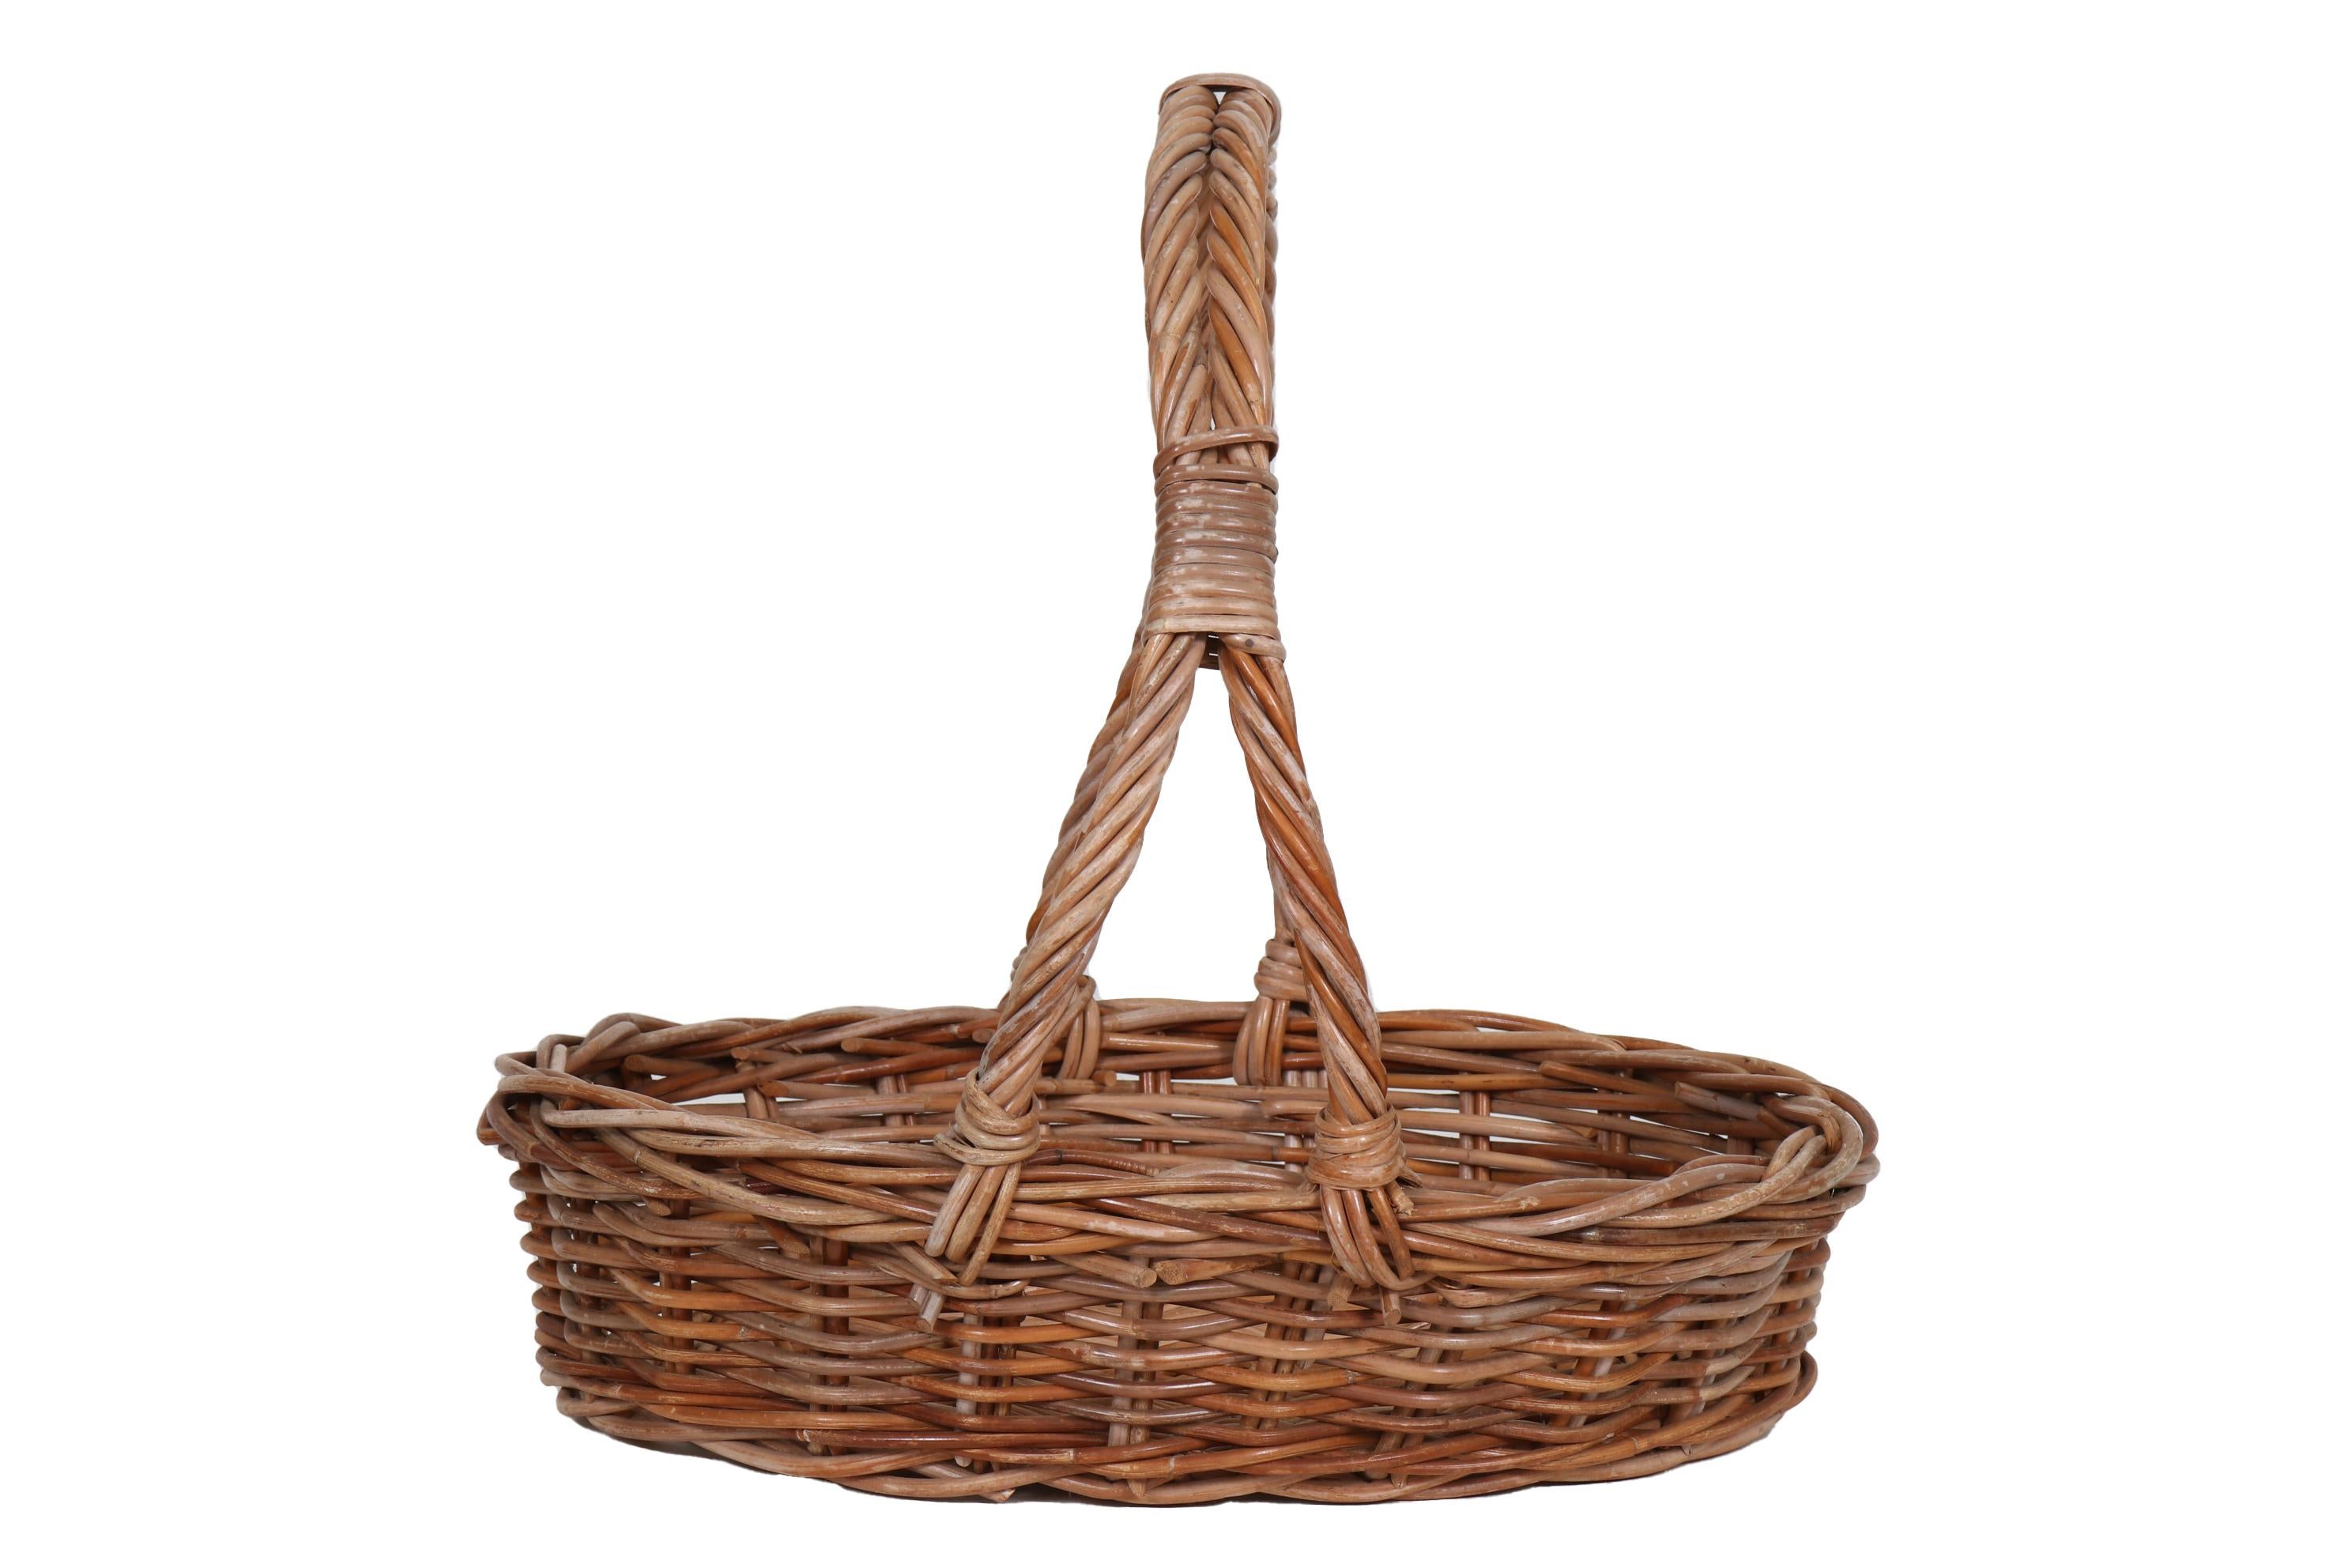 A French country wicker gathering basket. Made of woven rattan with two tall, twisted handles bound together.